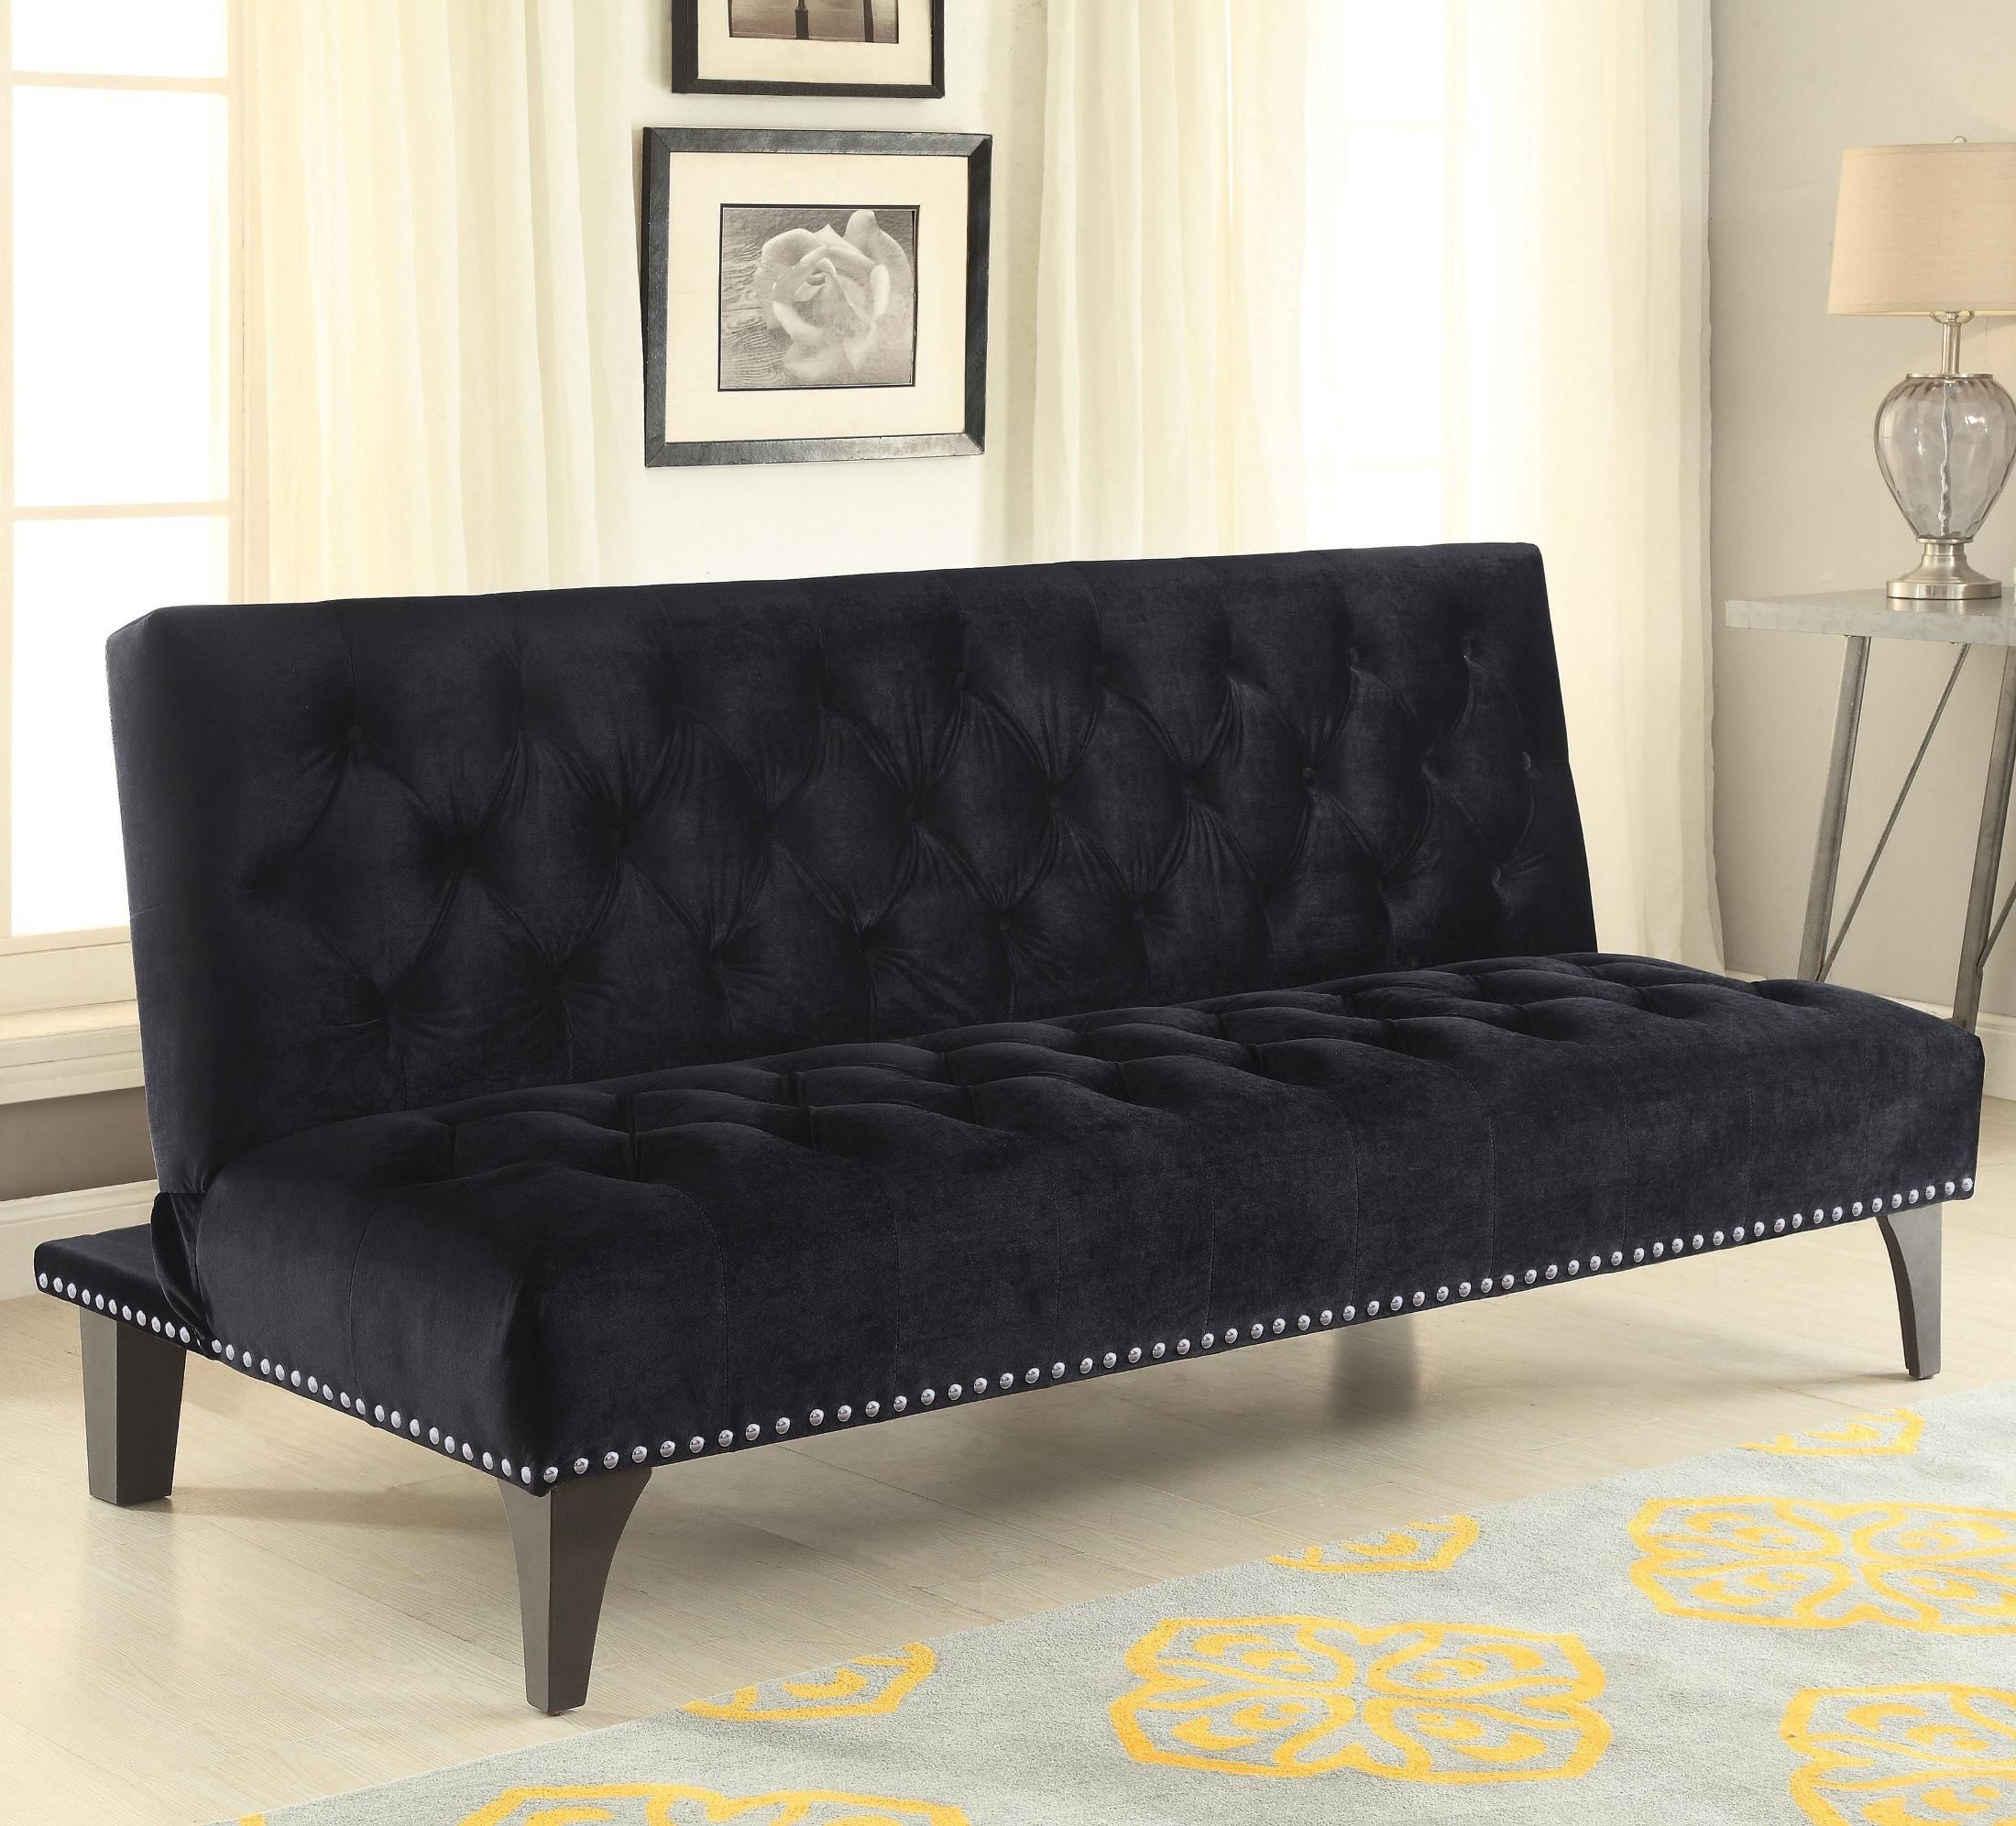 500237 Black Velvet Upholstery Sofa Bed From Coaster (500237) | Coleman With 2 Seater Black Velvet Sofa Beds (View 5 of 20)